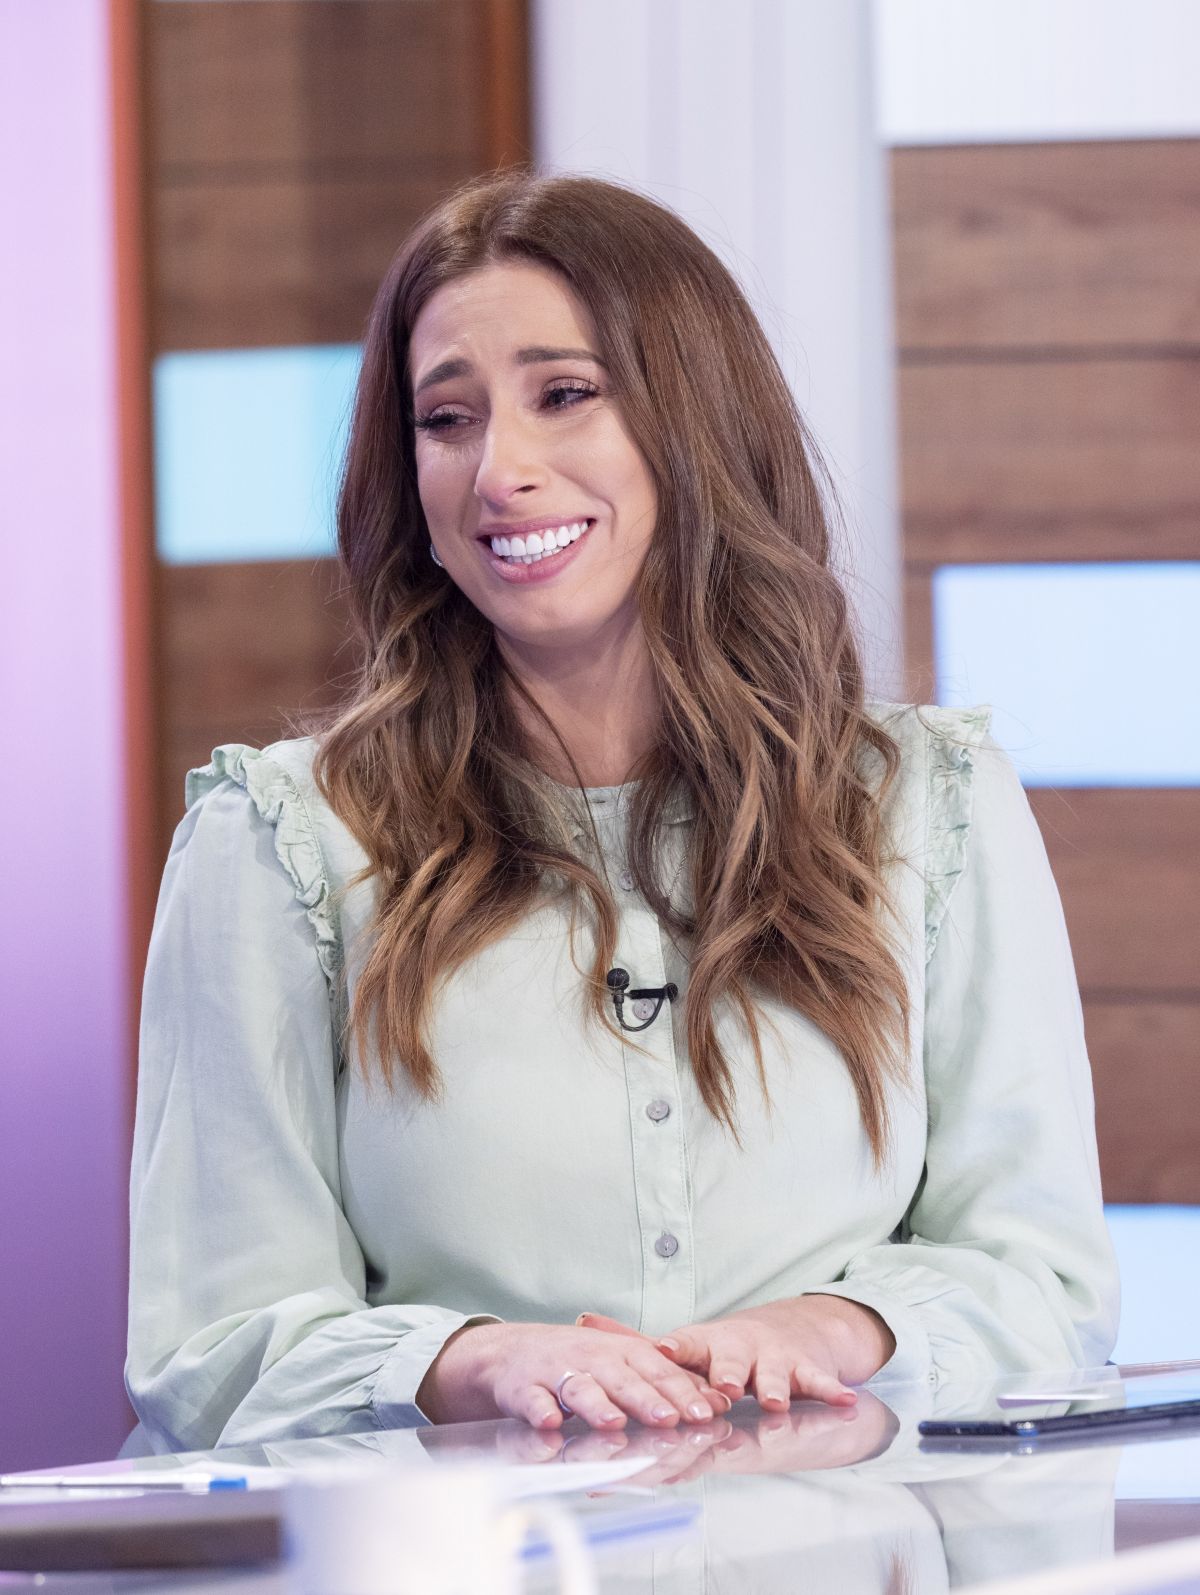 Stacey Solomon At Loose Women Tv Show In London 02 13 2020